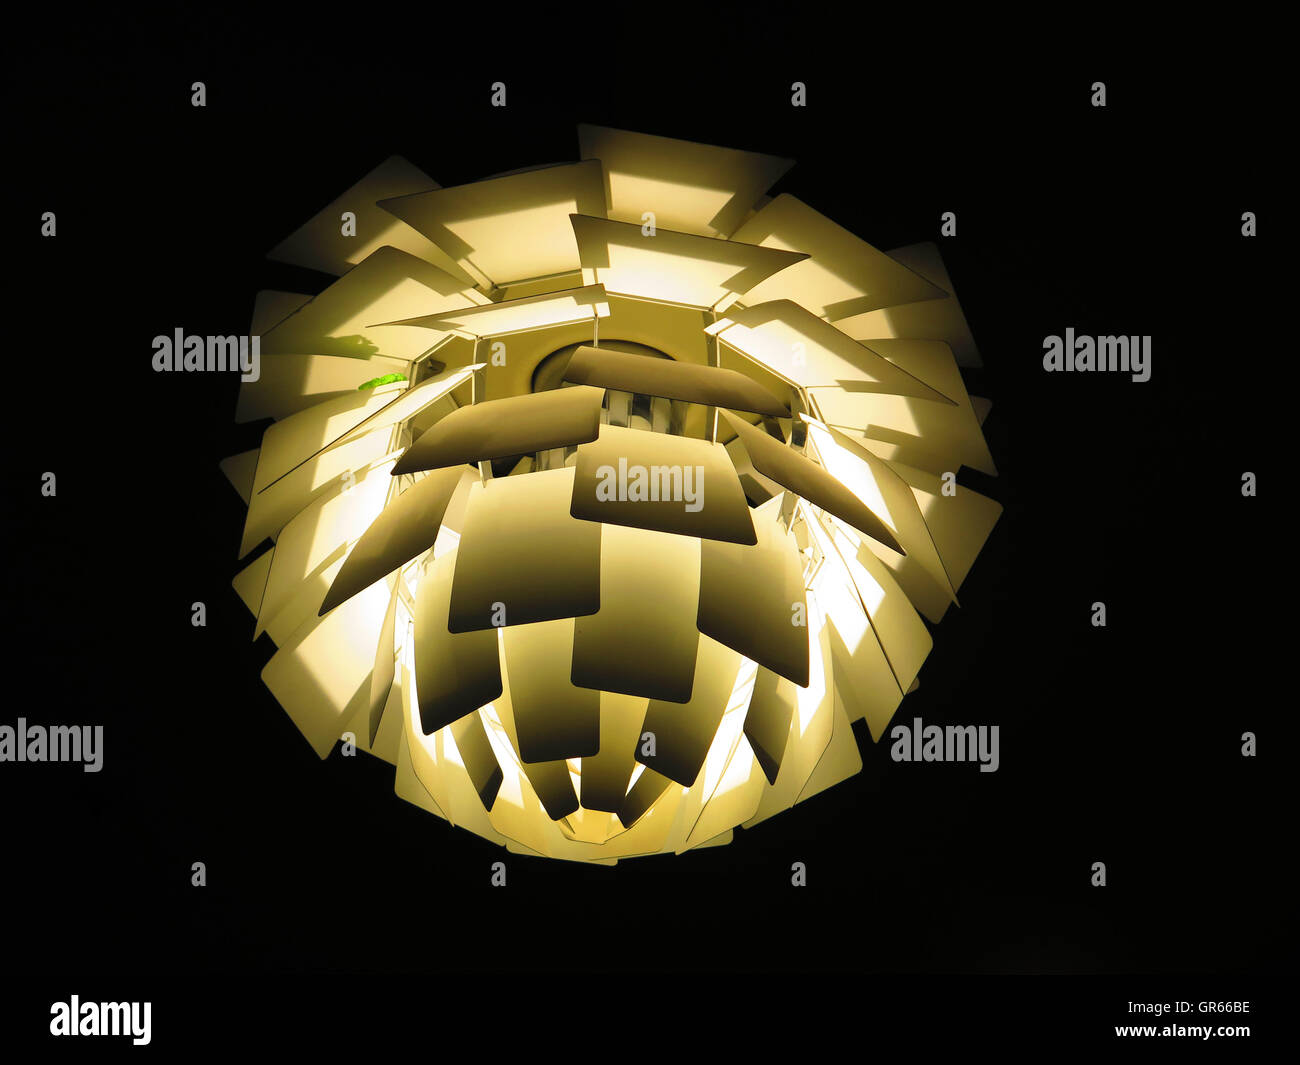 close-up of lamp shade hanging from ceiling Stock Photo